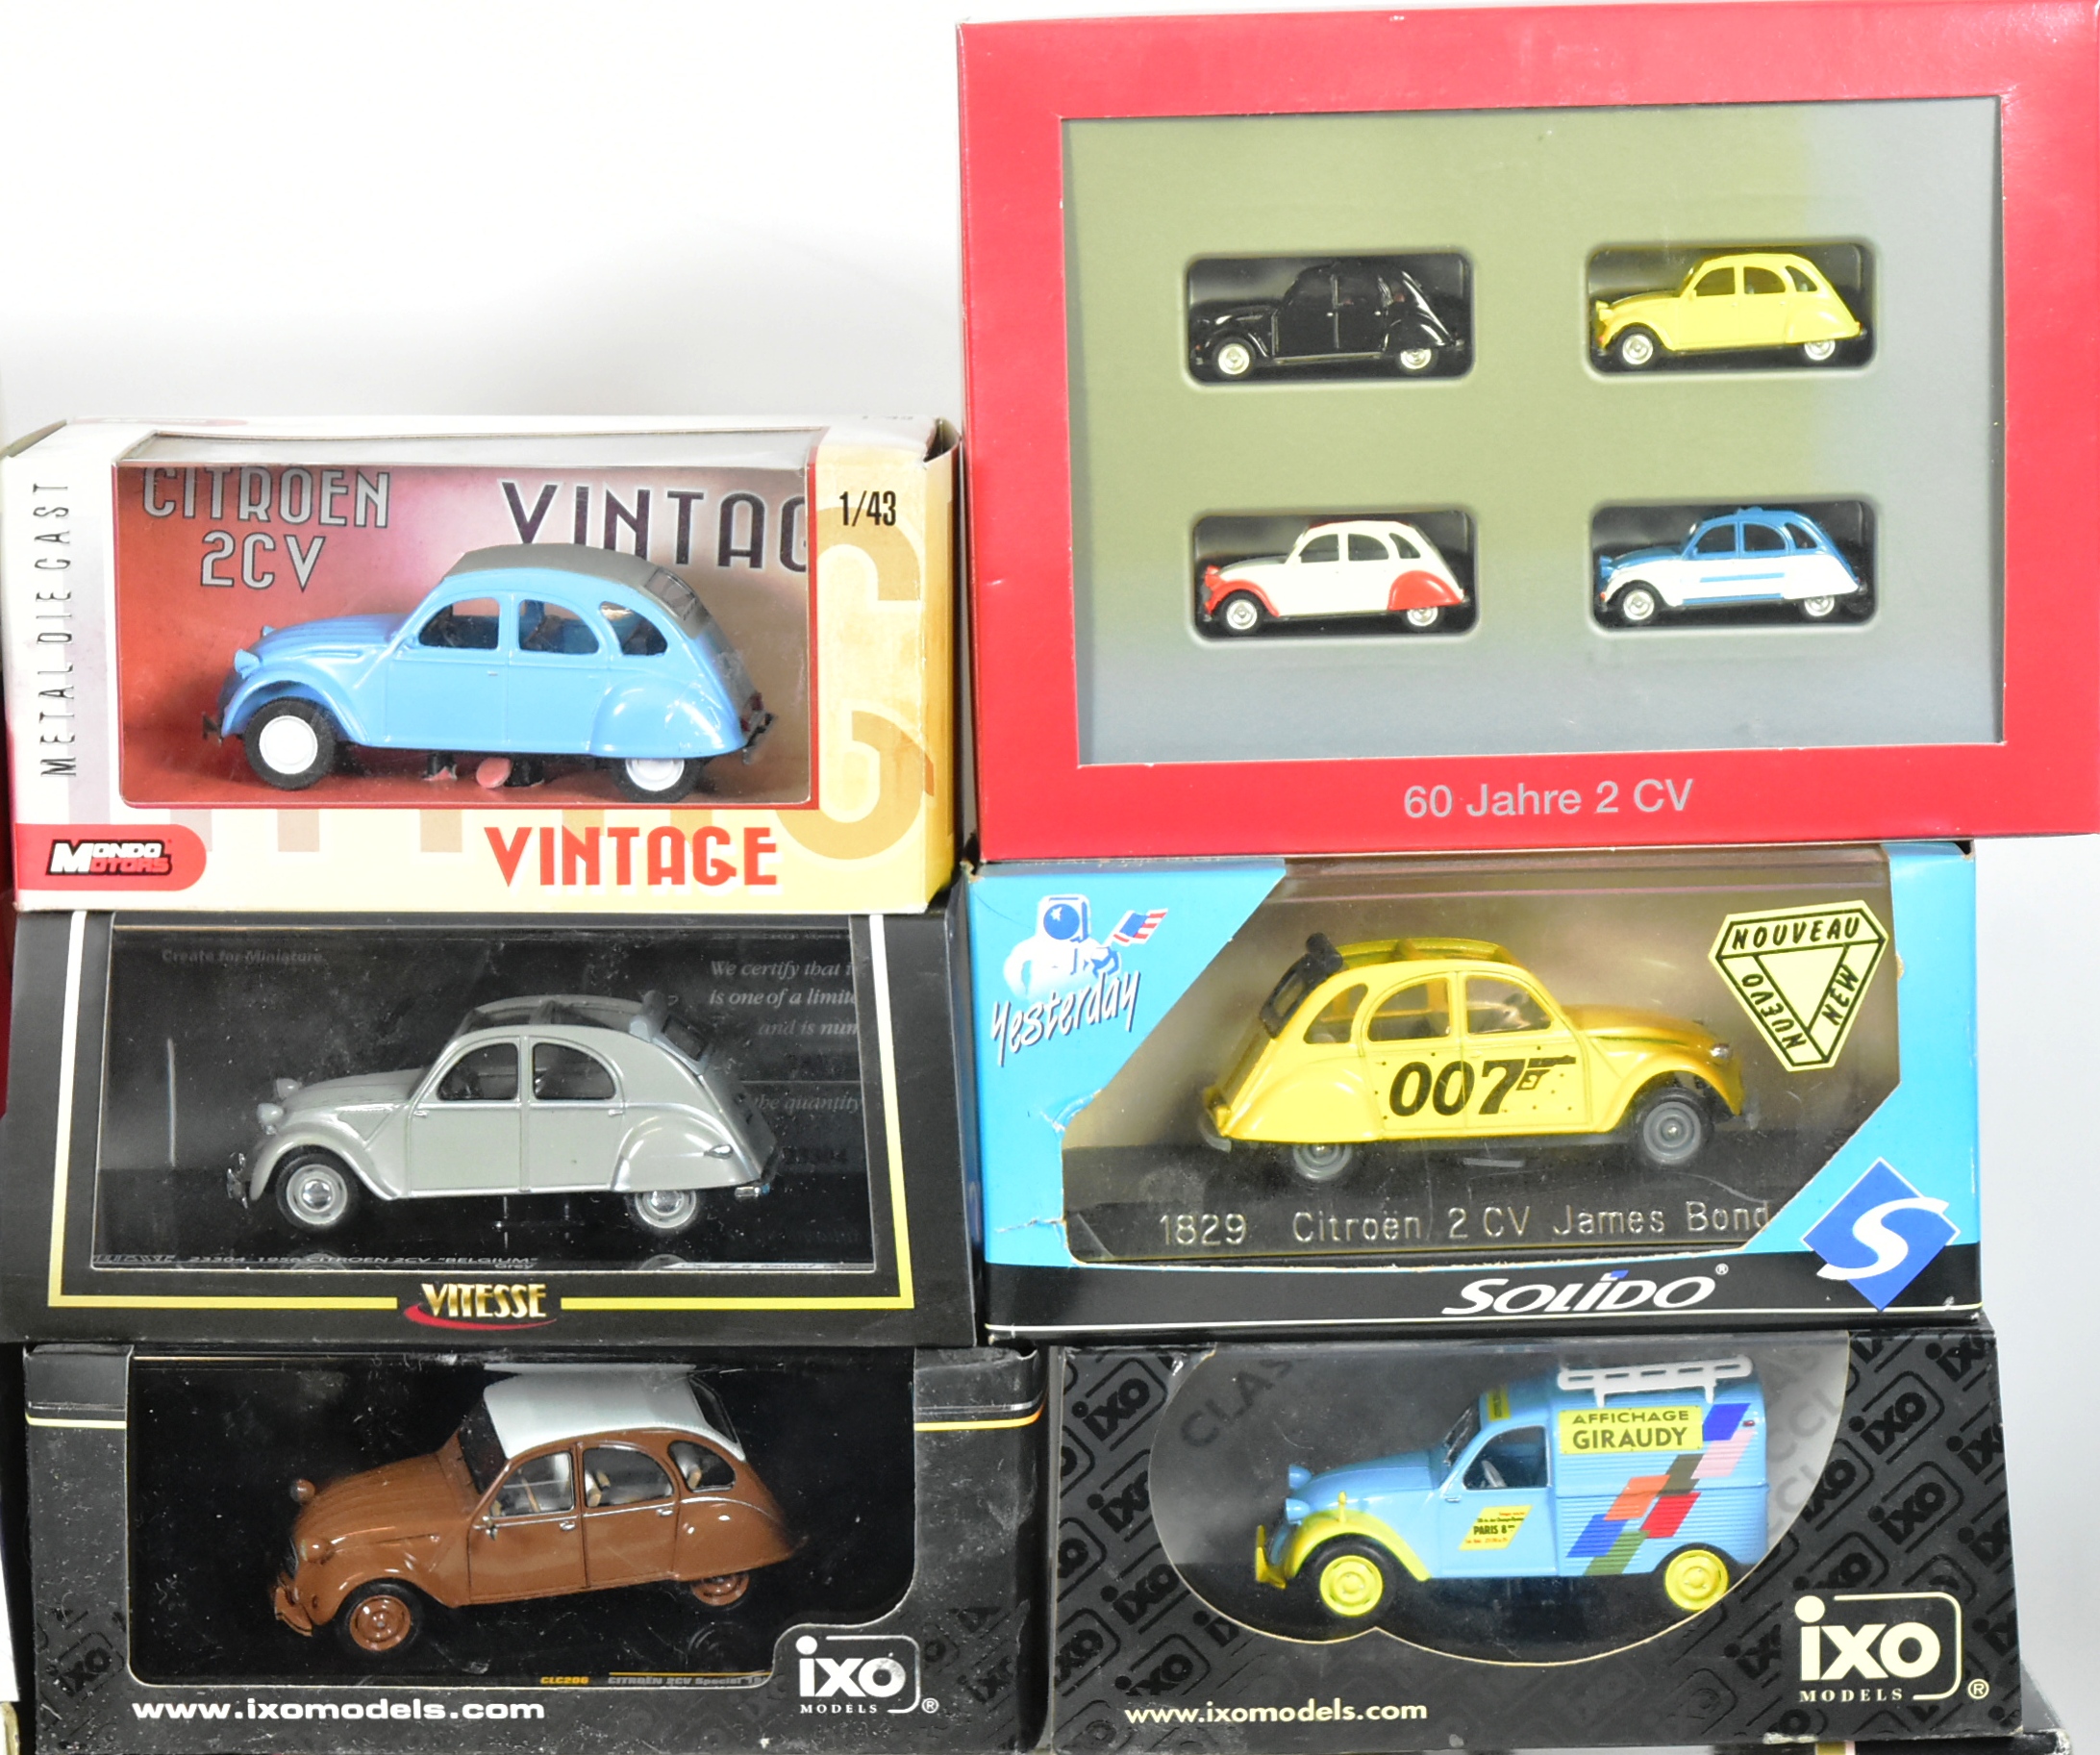 DIECAST - COLLECTION OF BOXED DIECAST CITROEN CARS - Image 2 of 6